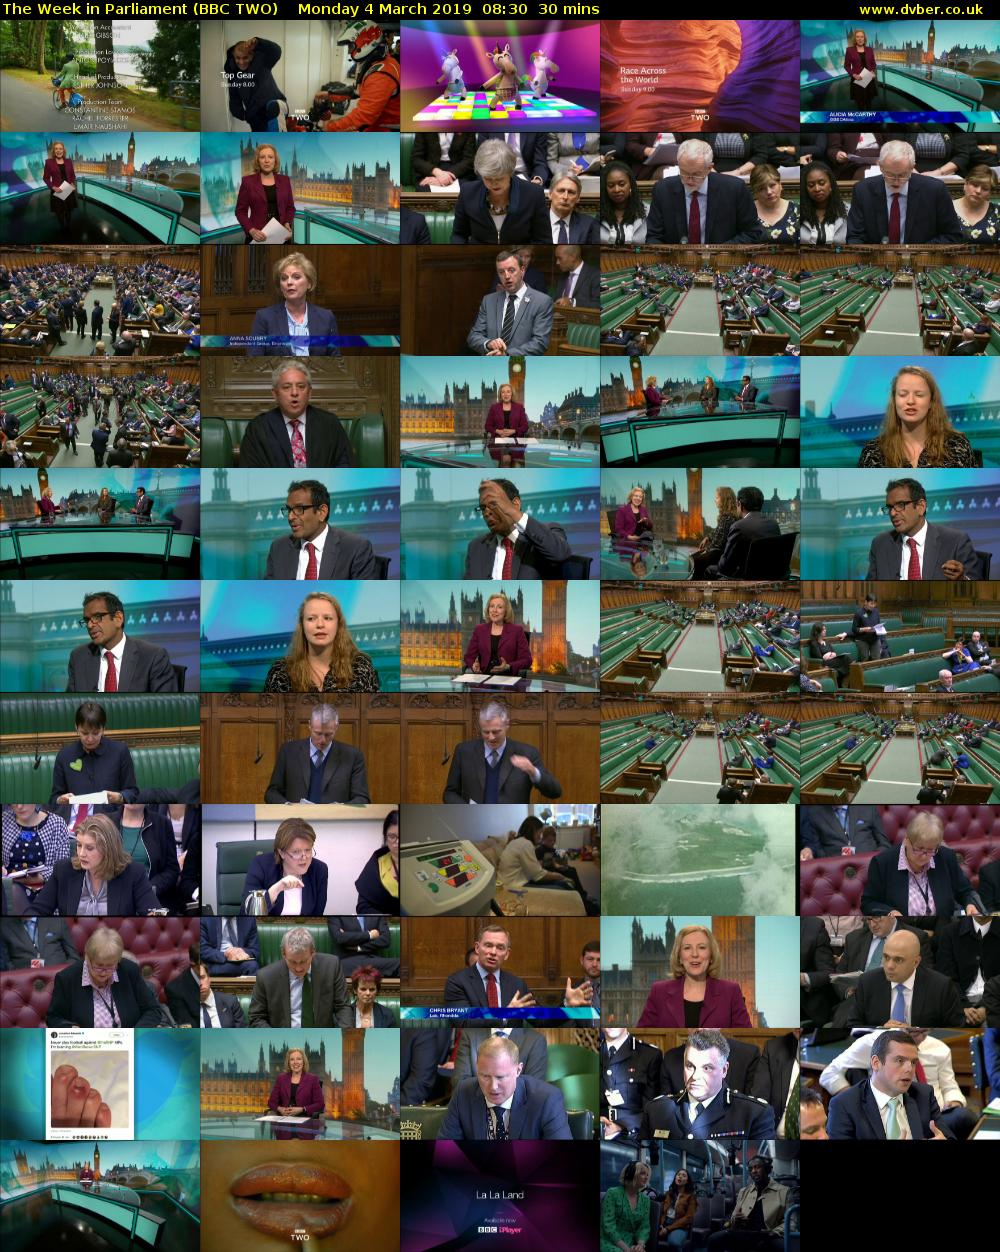 The Week in Parliament (BBC TWO) Monday 4 March 2019 08:30 - 09:00